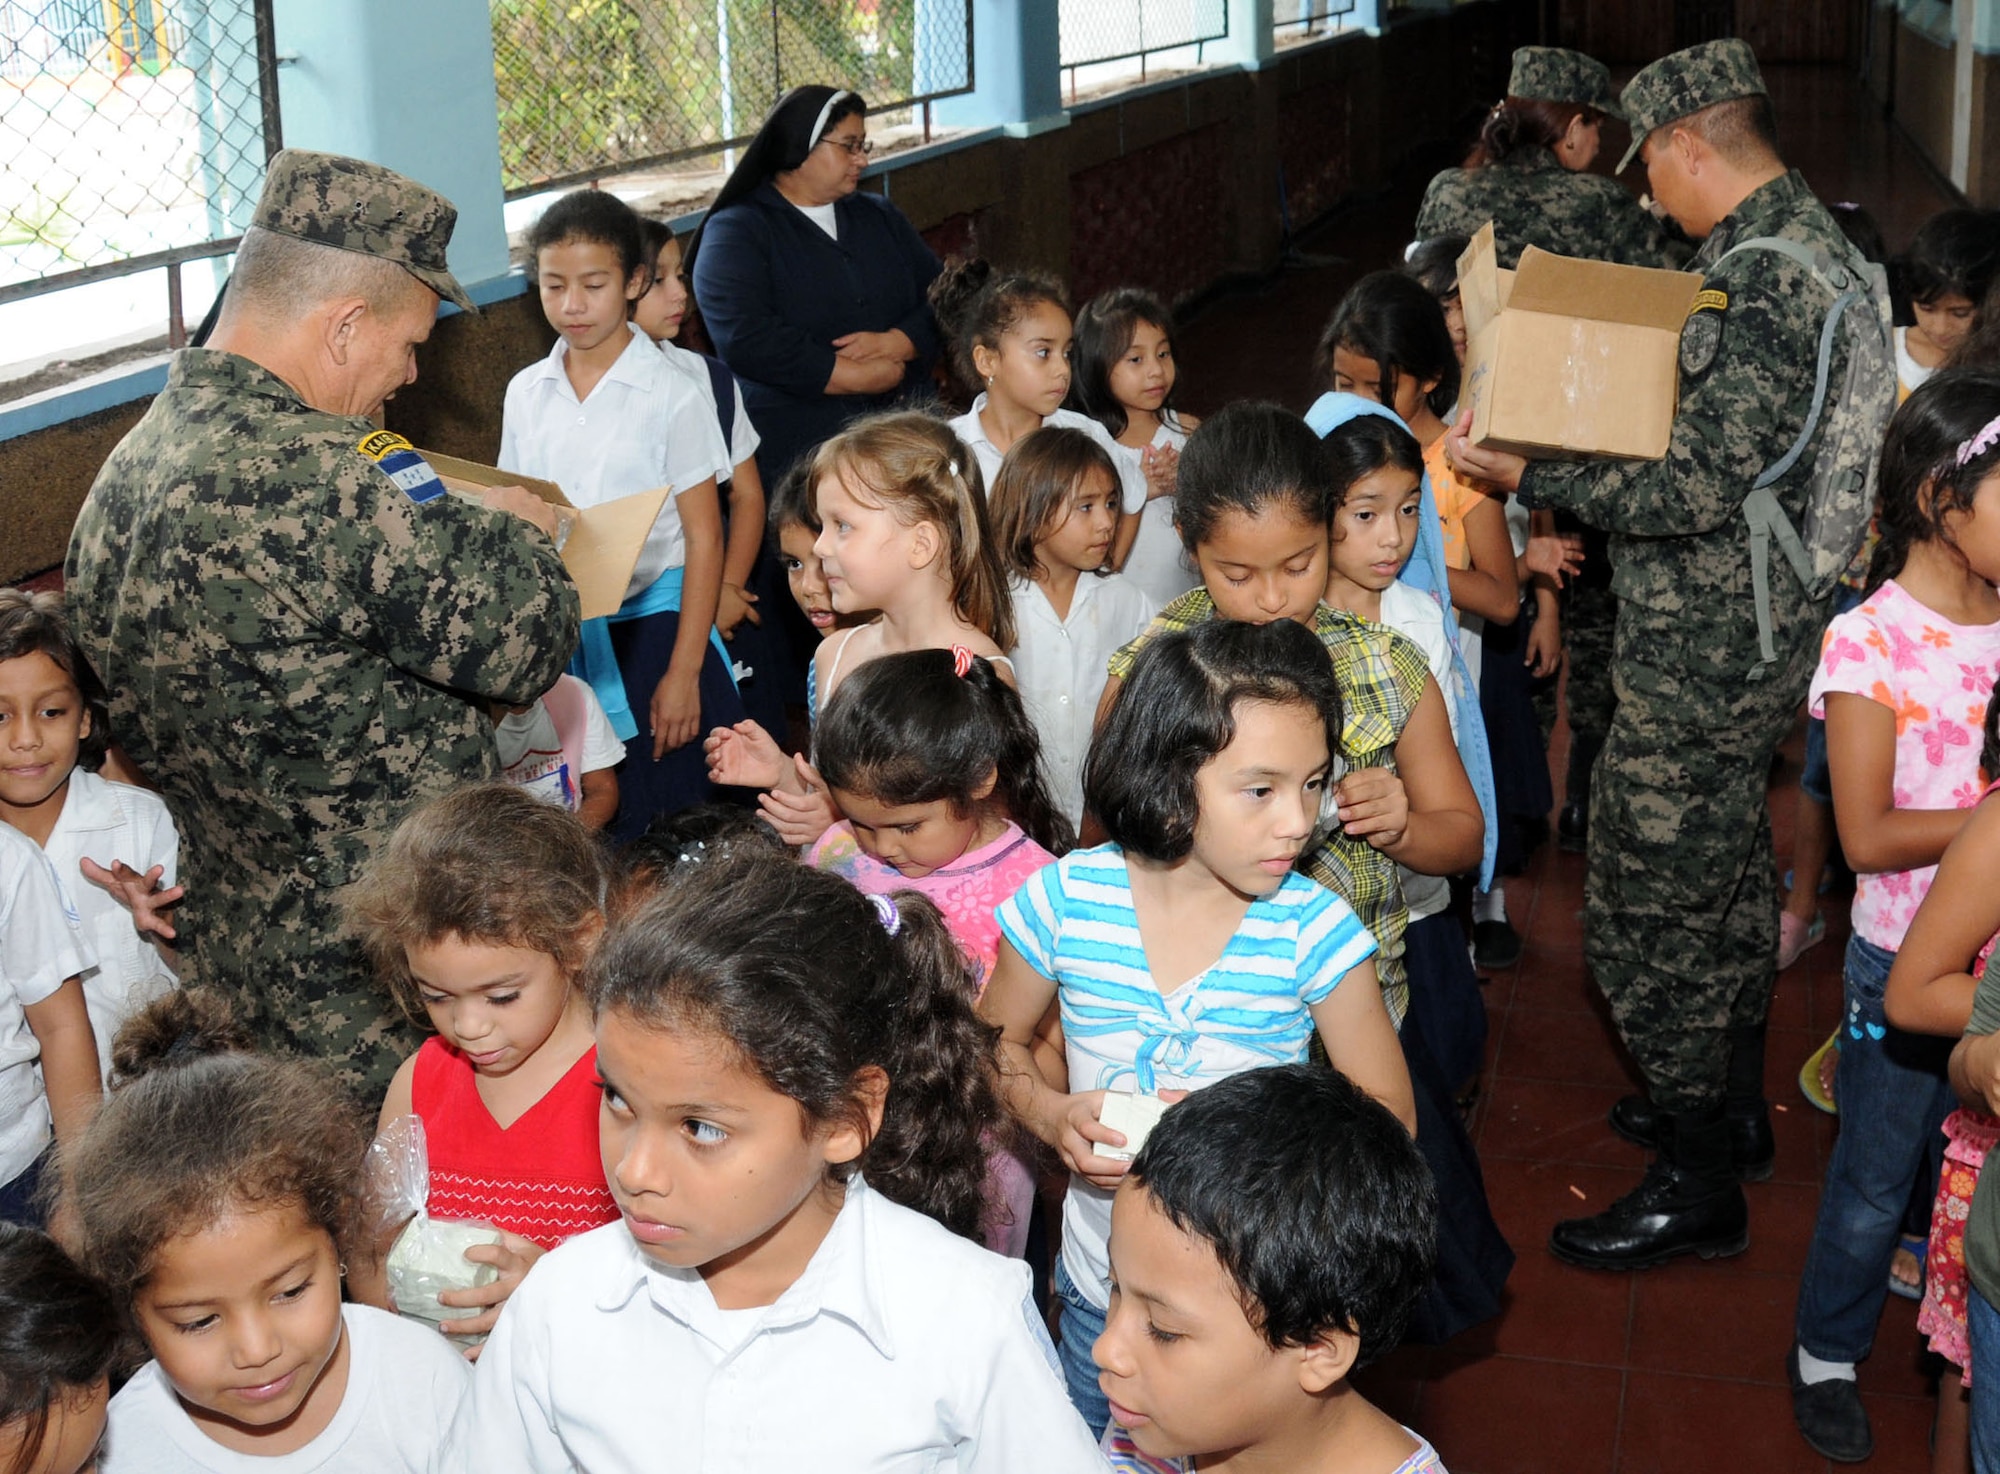 Personnel from the Honduran 21st Military Police Battalion hand out soap kits to the children of the Hogar del Nino school.  Joint Task Force-Bravo, non-government organizations Clean the World, Bridge Ministries and Kick for Nick Foundation, the Honduran 21st Military Police Battalion and the Honduran National Police formed a partnership to distribute soap kits, backpacks with school supplies, tooth brushes and tooth paste, soccer balls and uniforms to students at eight Tegucigalpa, Honduras schools in a two-day event, May 20-21, 2014.  The group handed out over 4,200 soap kits, 600 backpacks, 150 tooth brushes and tooth paste, and 50 soccer balls.  (Photo by U. S. Air National Guard Capt. Steven Stubbs)